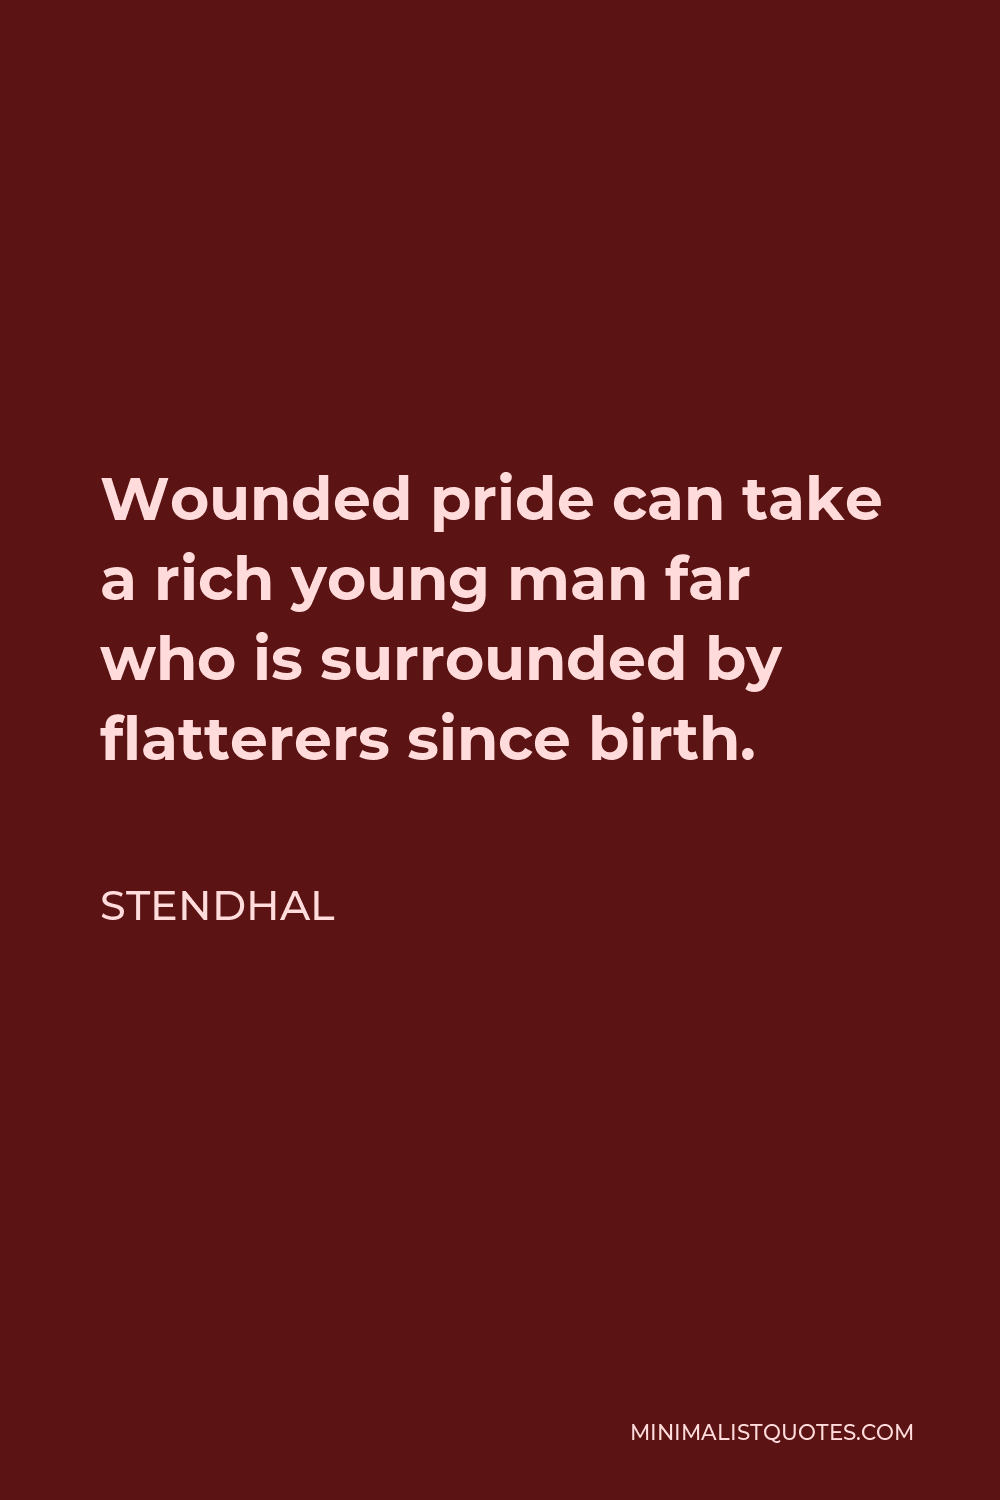 Stendhal Quote - Wounded pride can take a rich young man far who is surrounded by flatterers since birth.